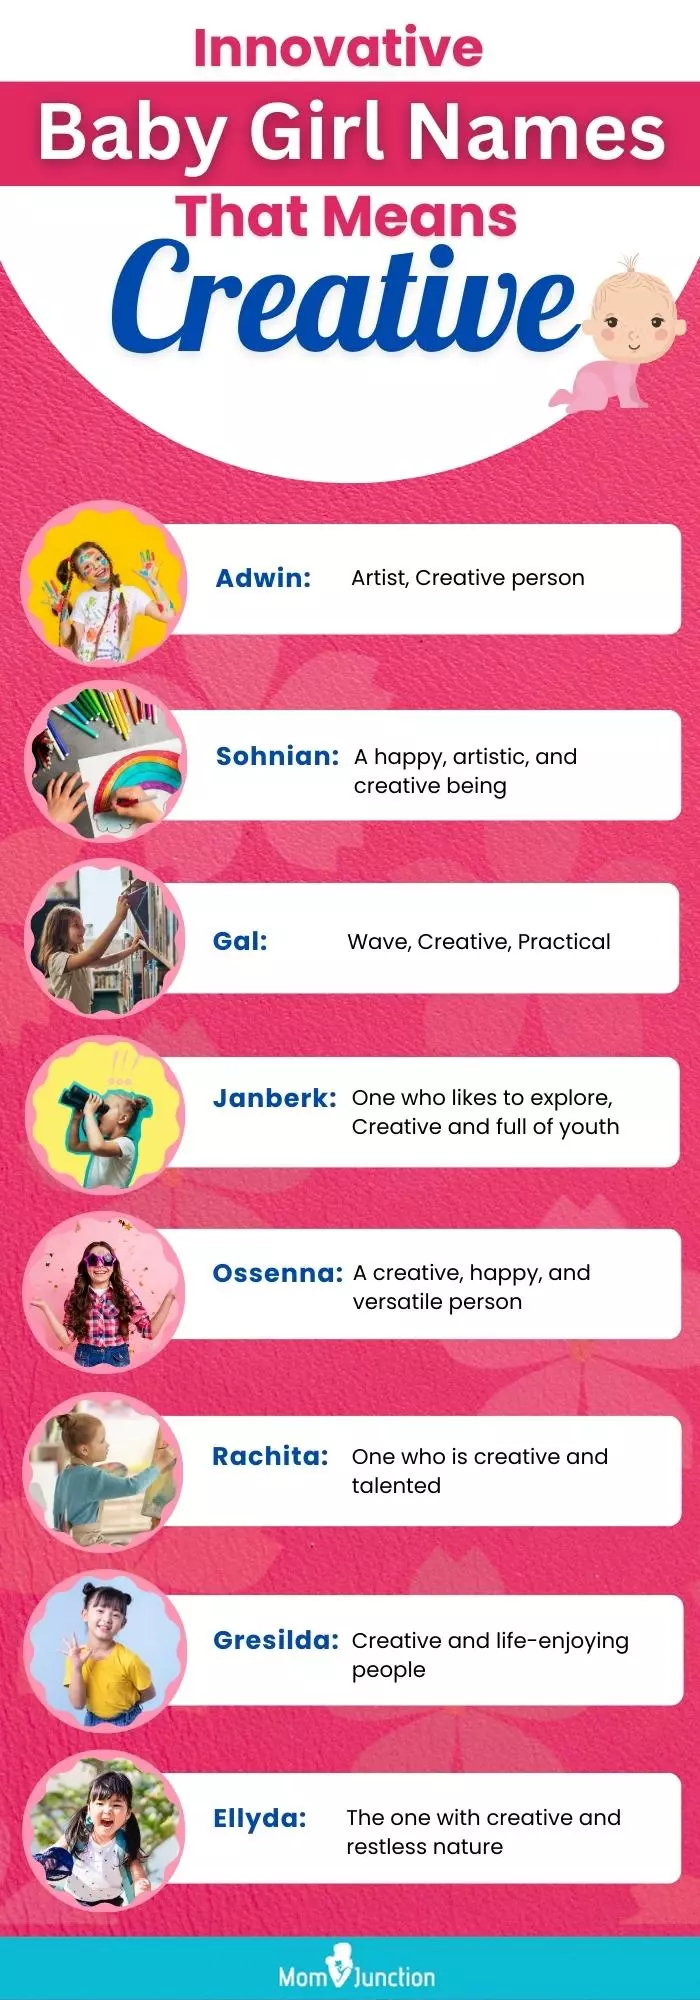 innovative baby girl names that means creative (infographic)